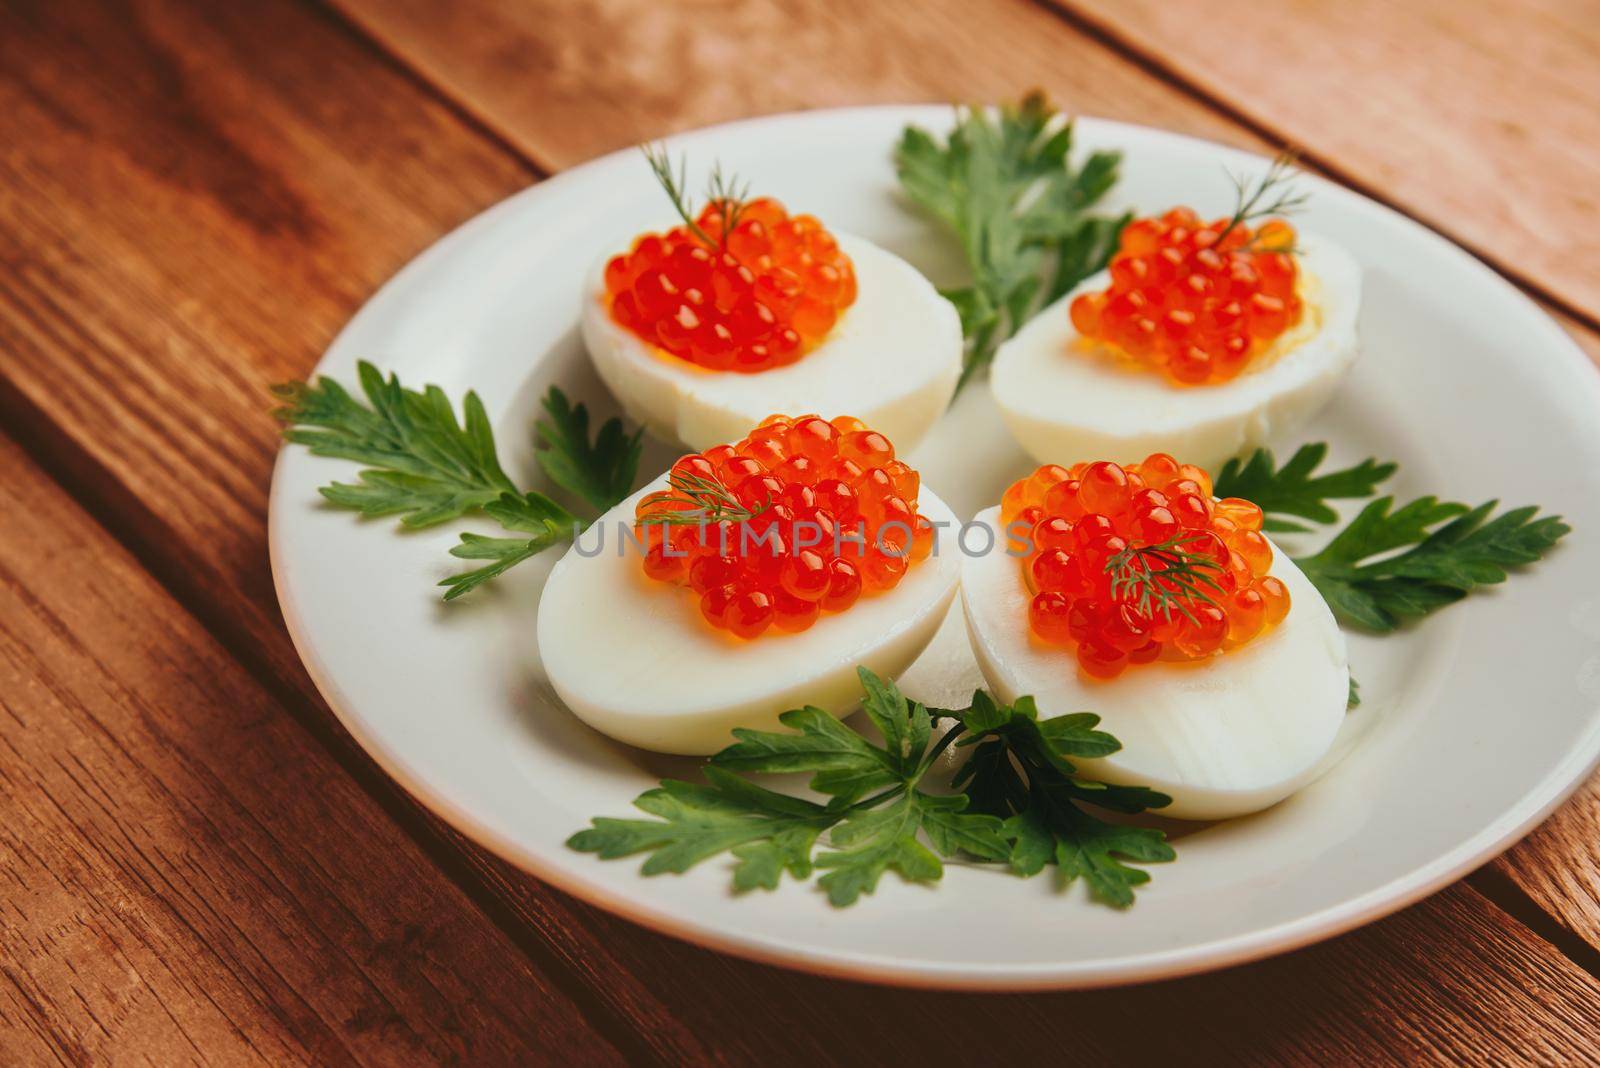 Dish boiled eggs with red salmon caviar and parsley on plate on a wooden background